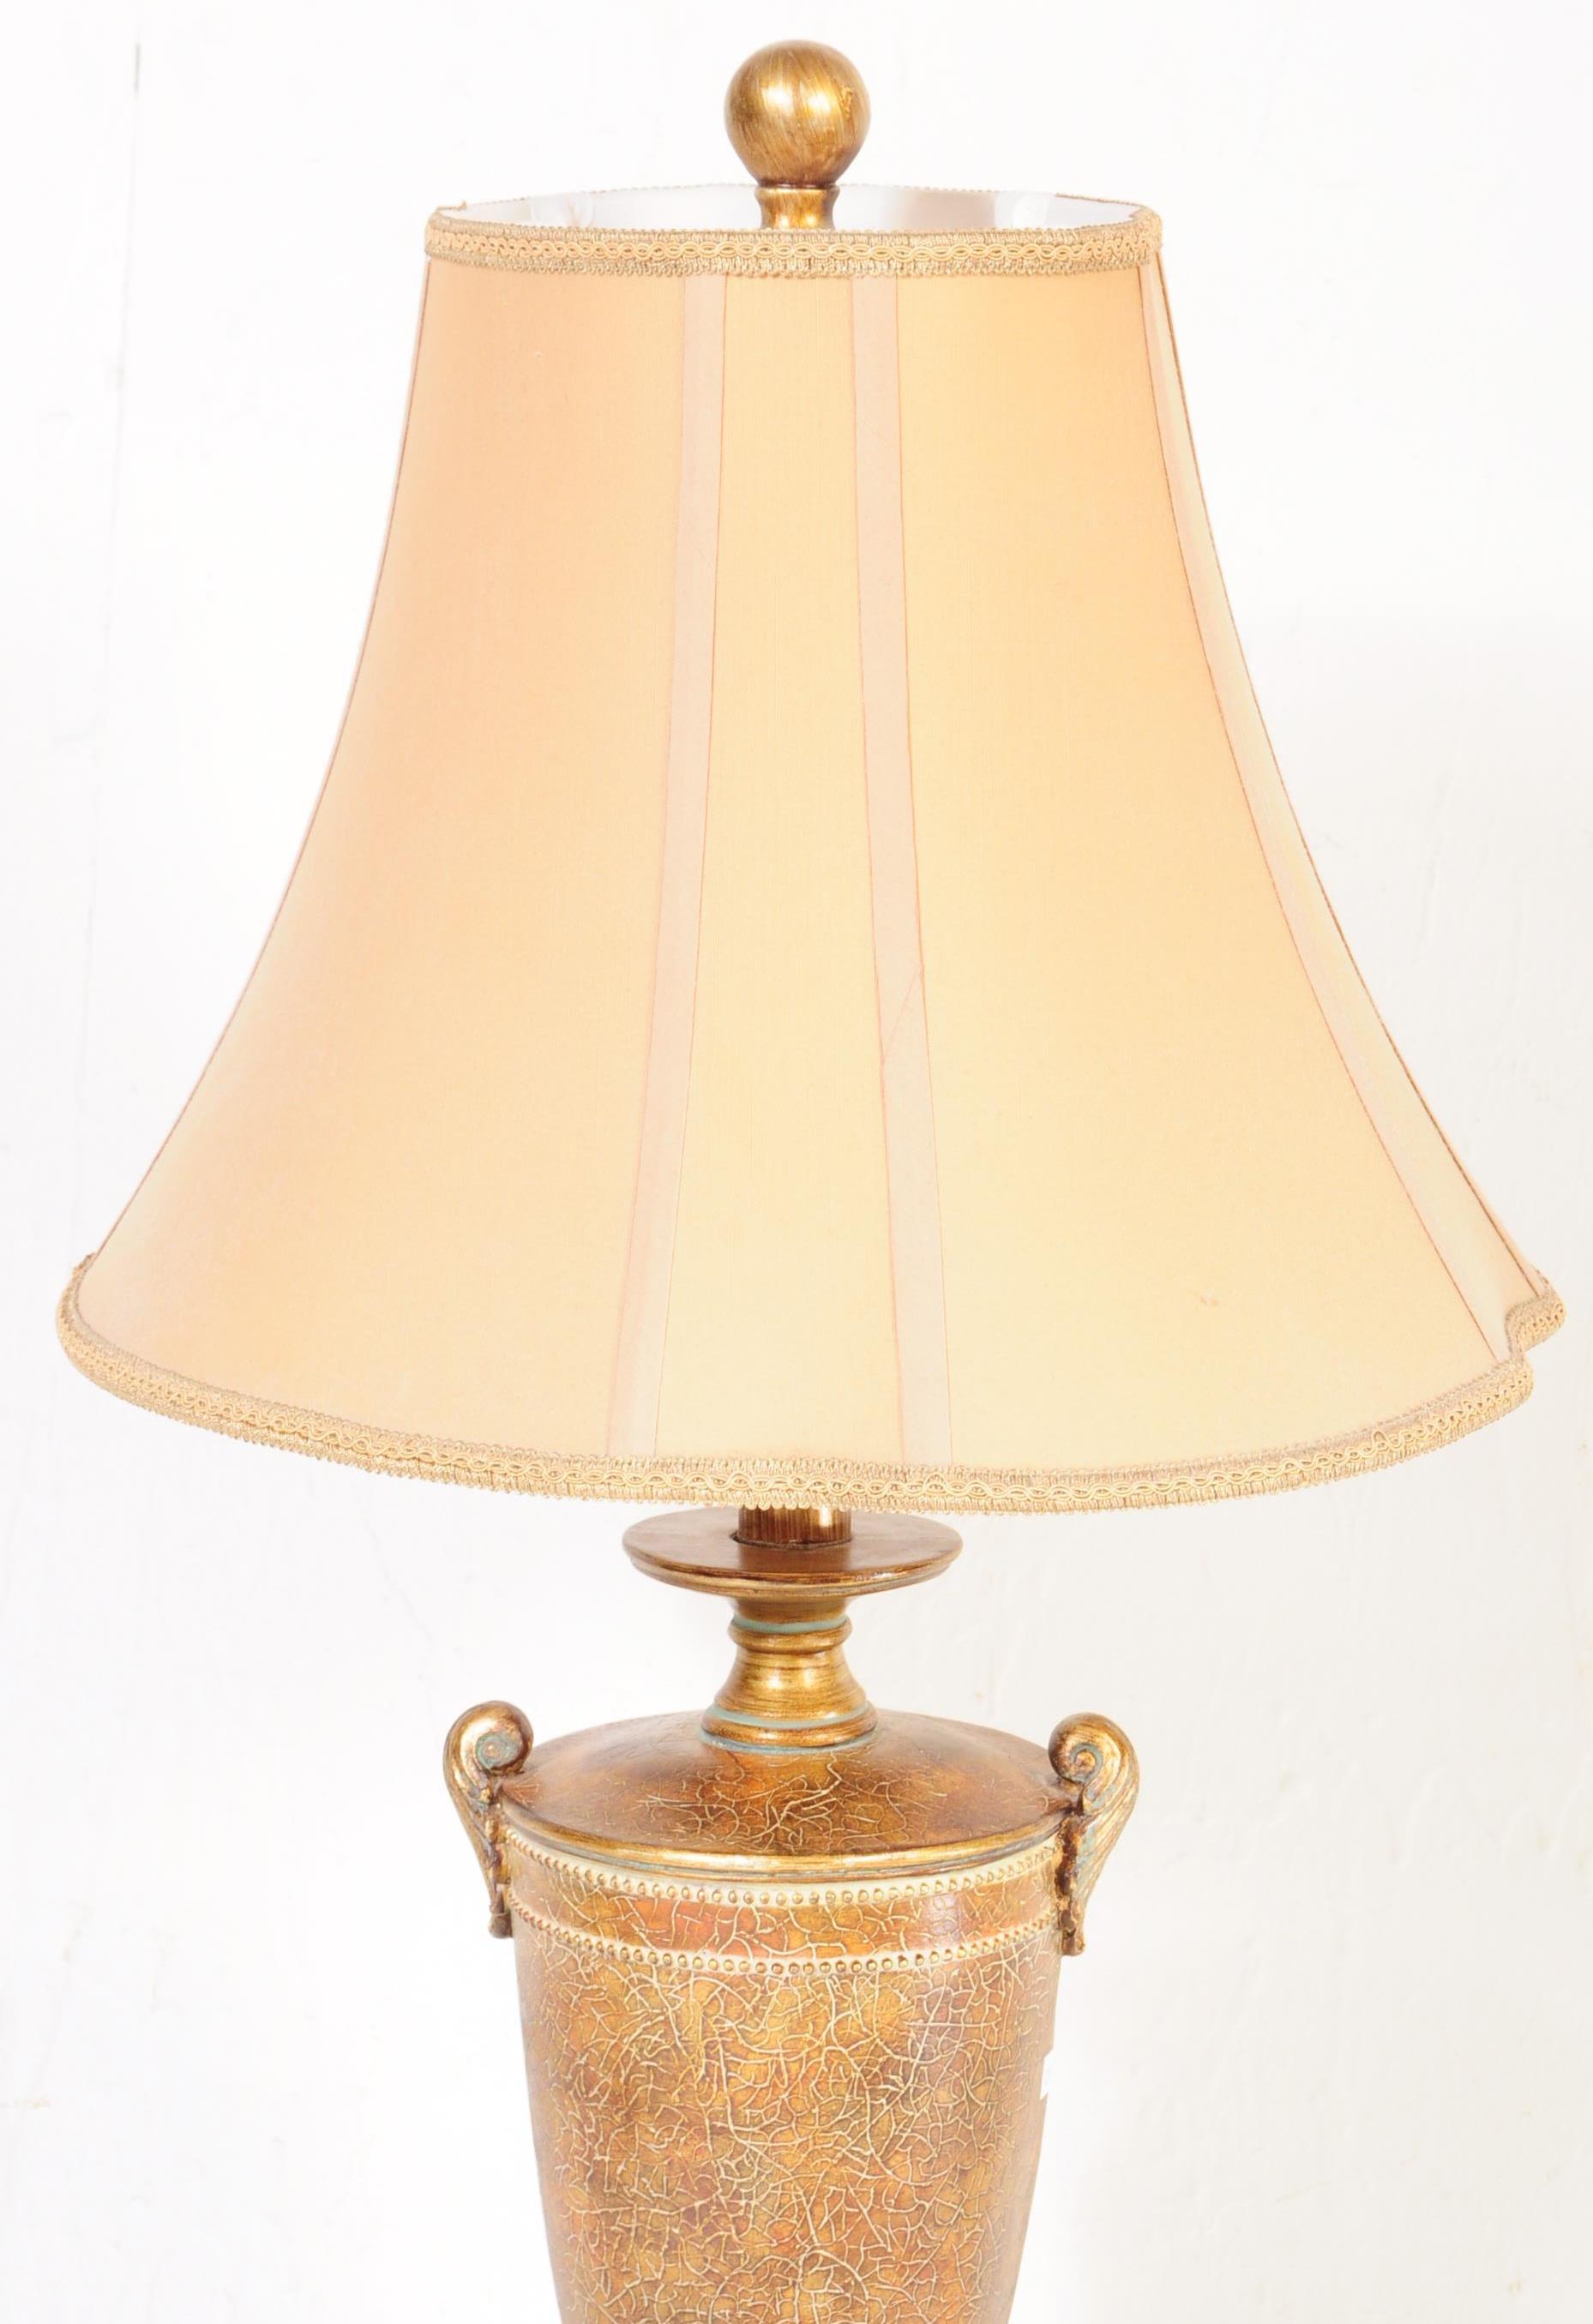 A PAIR OF 20TH CENTURY REGENCY STYLE FLOOR AND TABLE LAMPS - Image 5 of 5